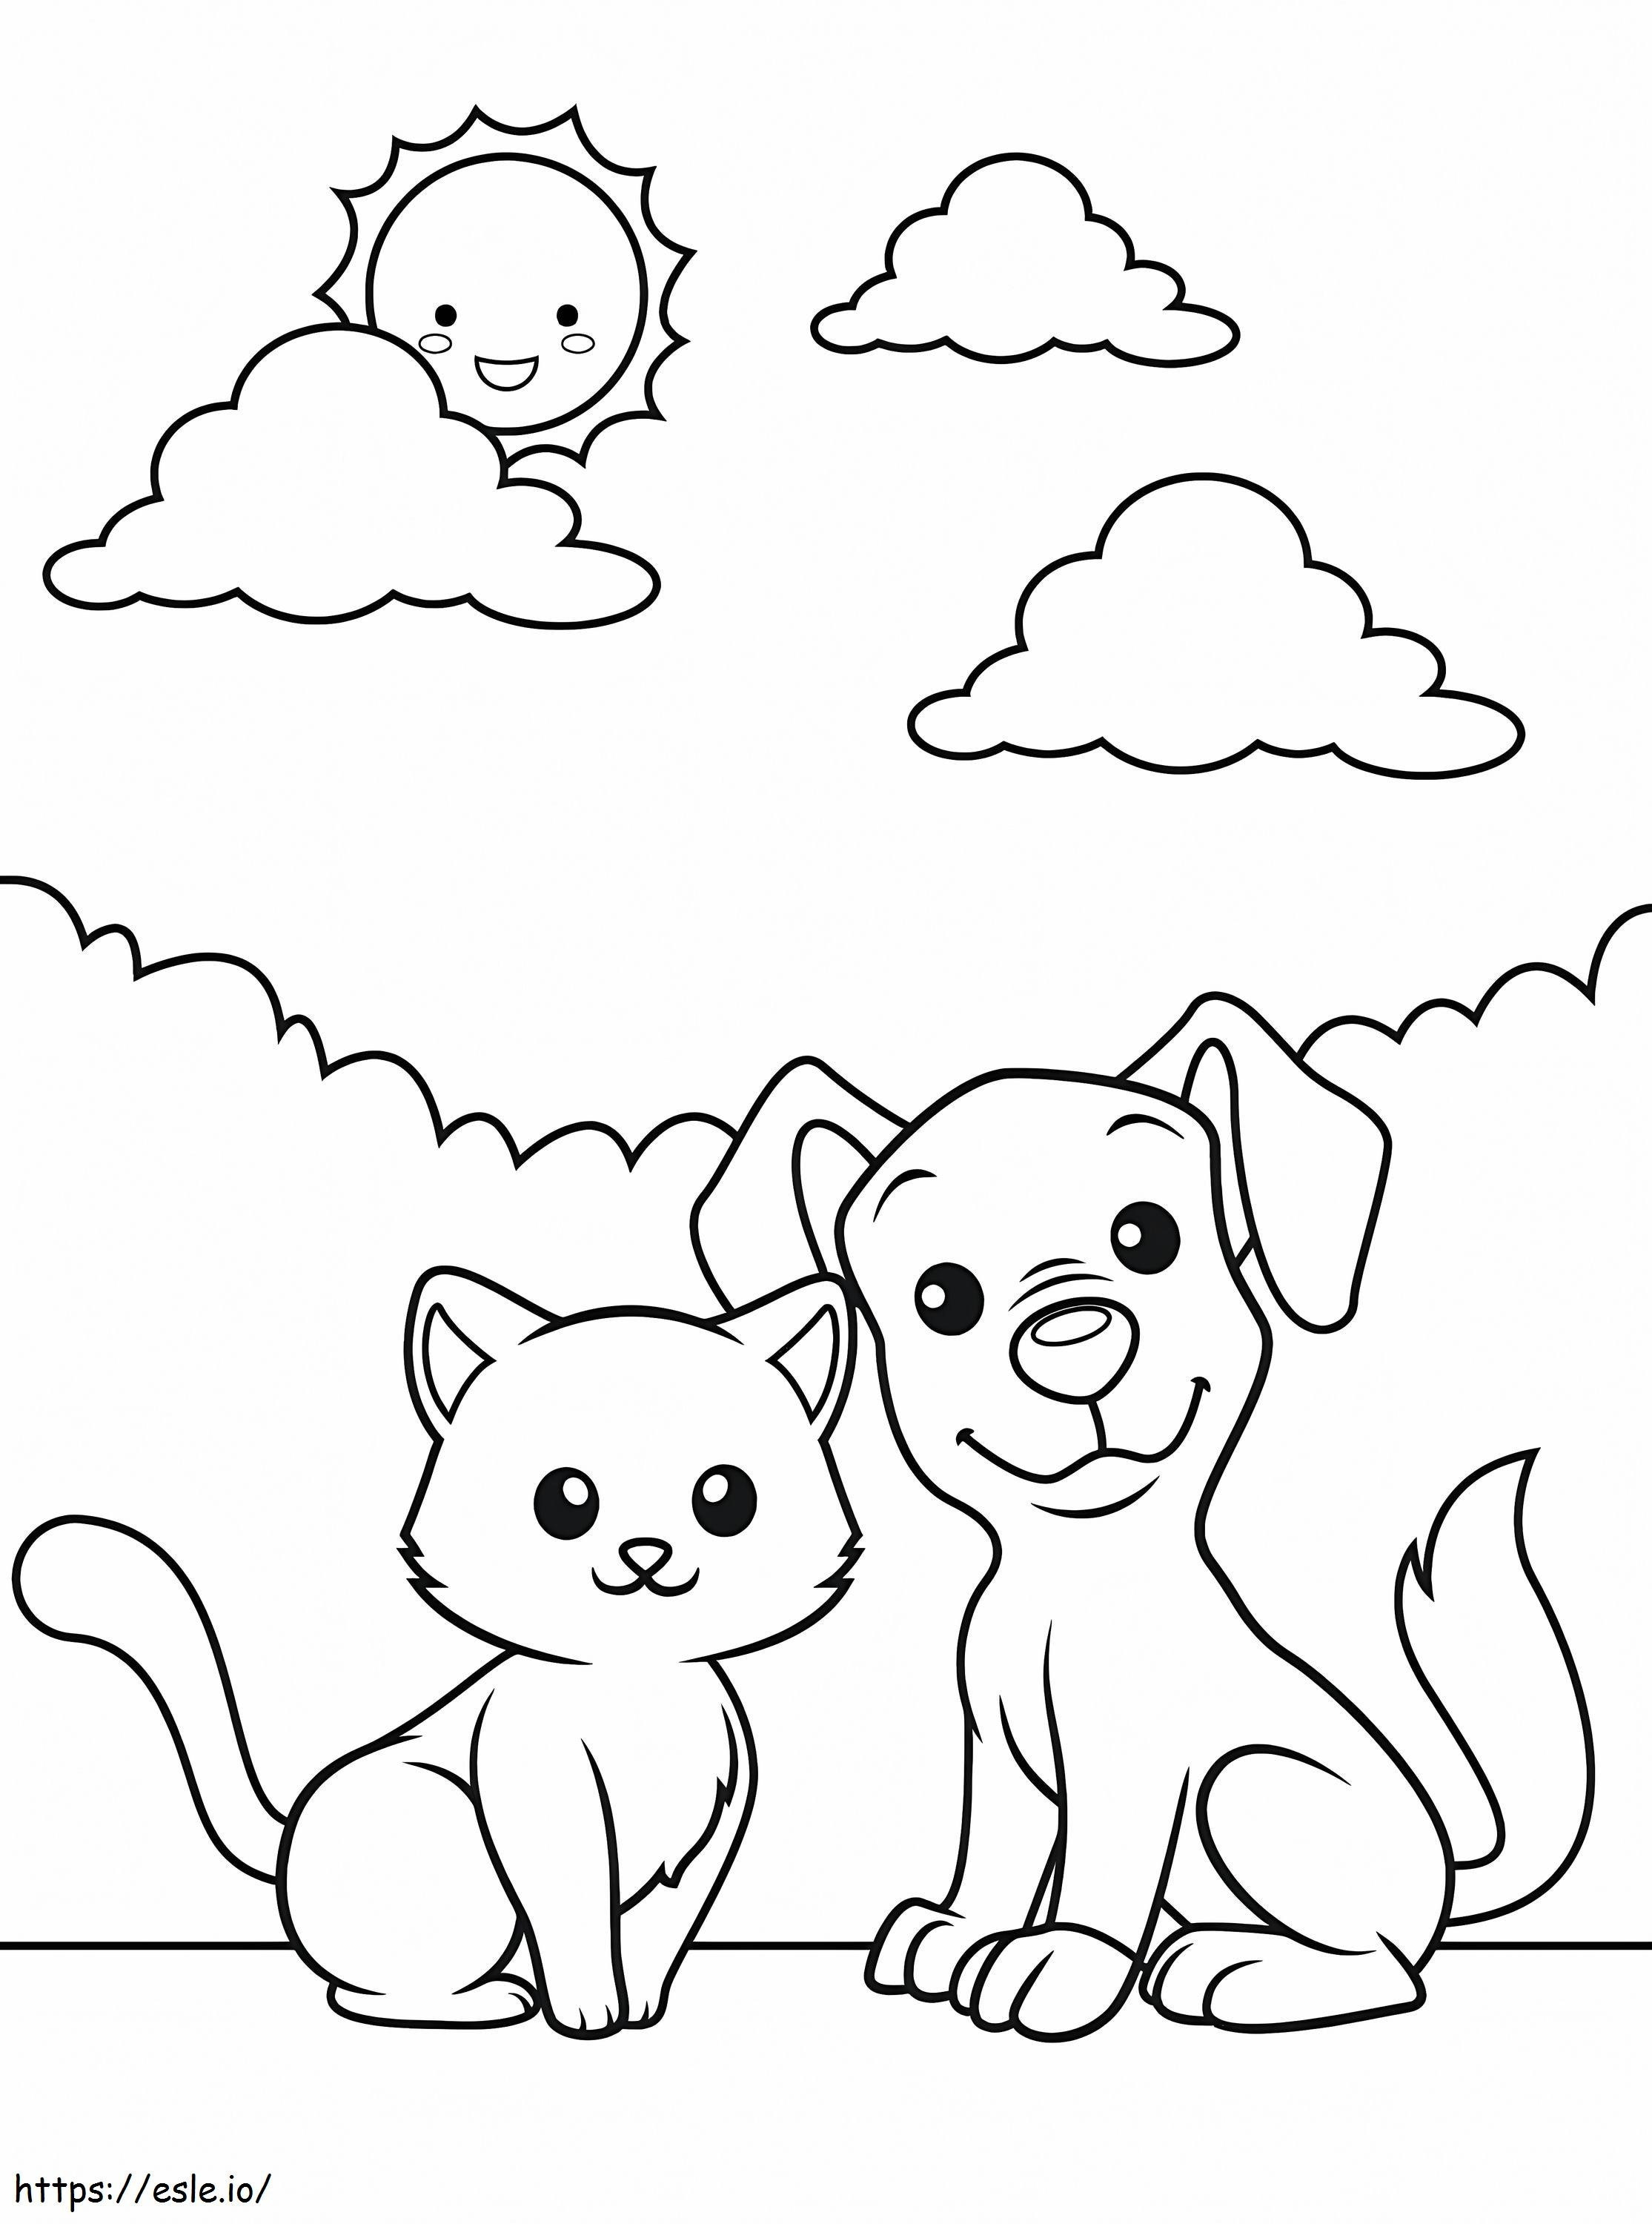 Dog And Cat coloring page